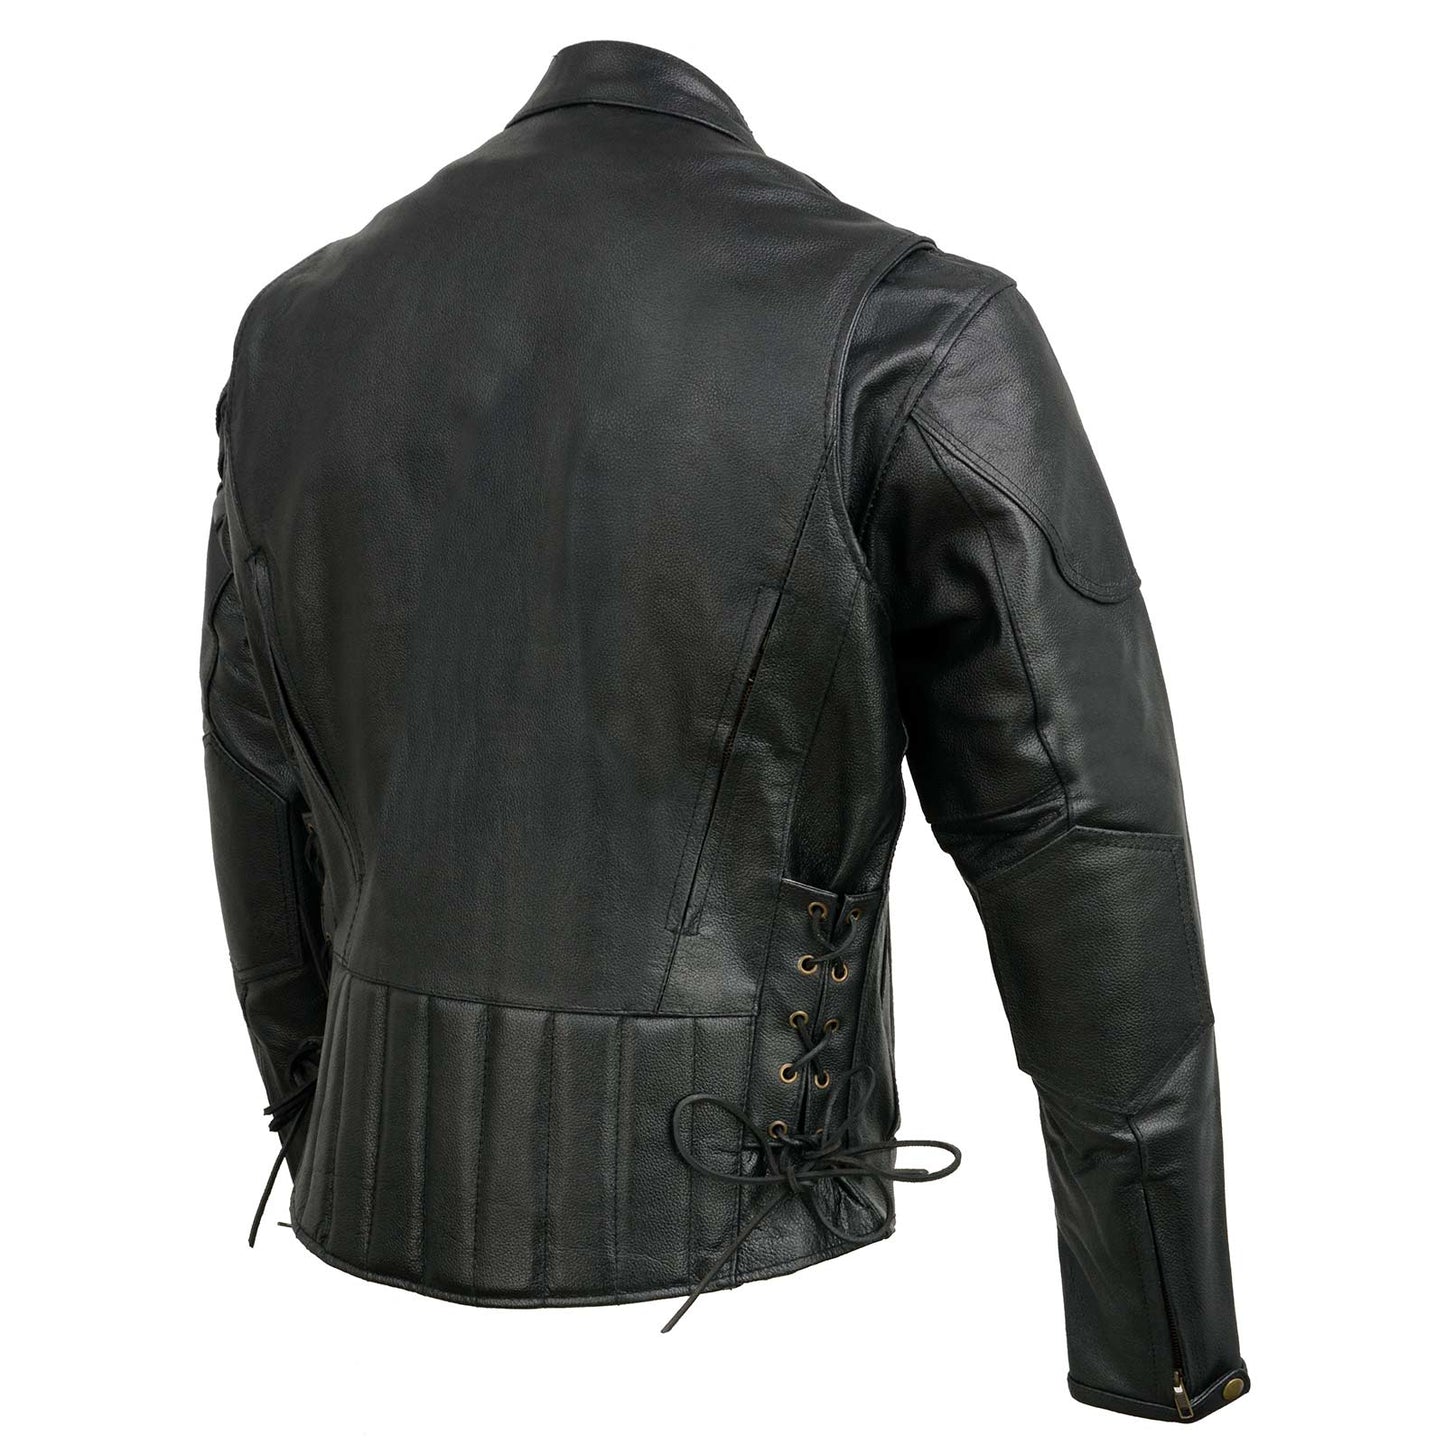 Event Leather EL5410 Men's Black Side Lace Scooter Jacket with Vents - Motorcycle Riding Jackets